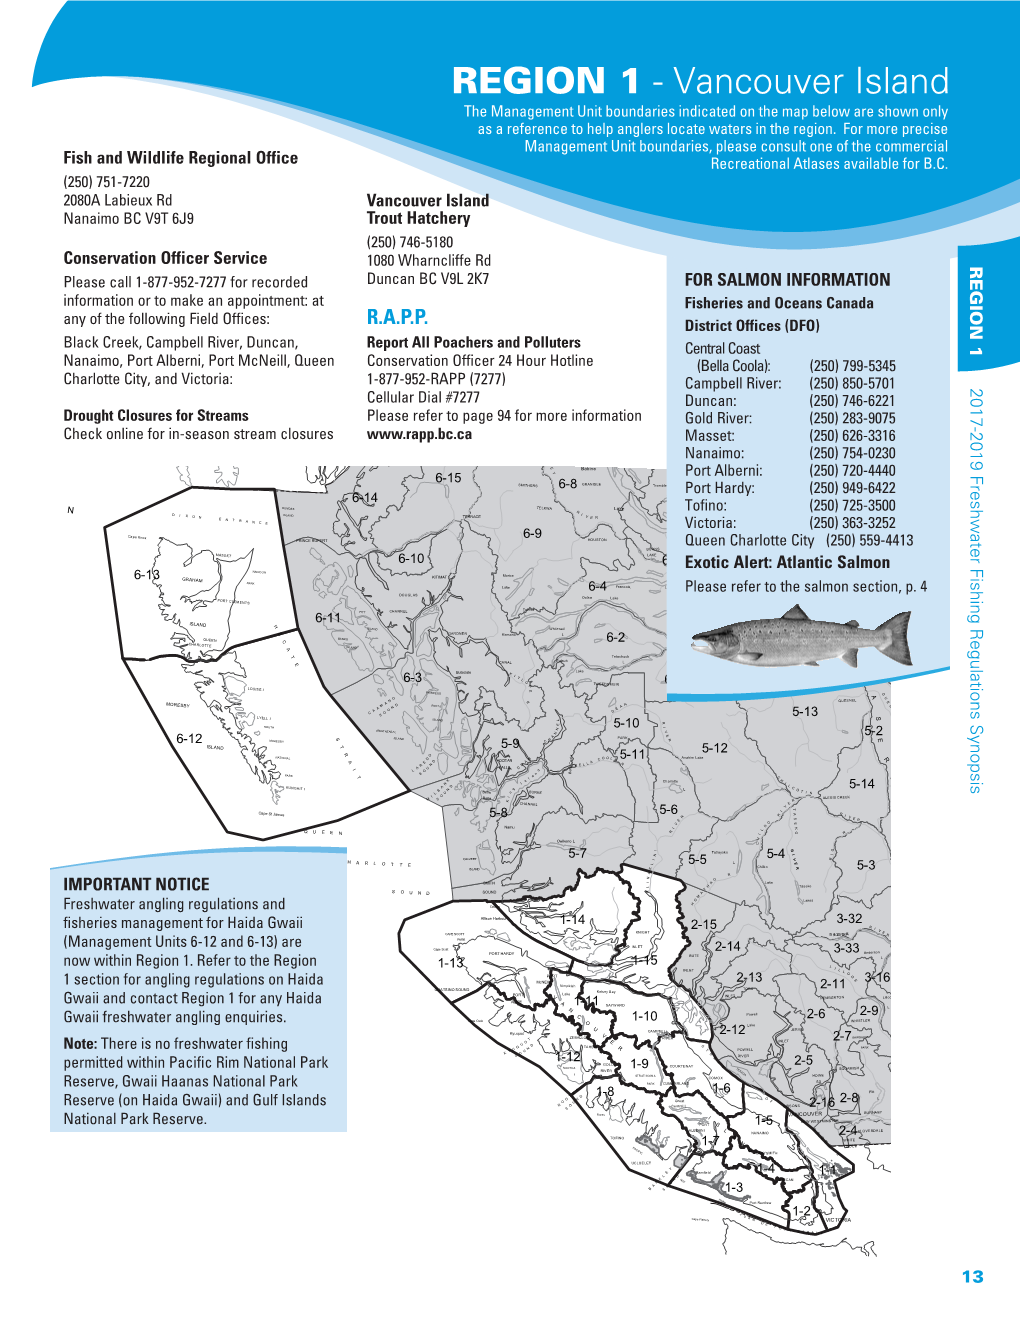 REGION 1 - Vancouver Island the Management Unit Boundaries Indicated on the Map Below Are Shown Only As a Reference to Help Anglers Locate Waters in the Region